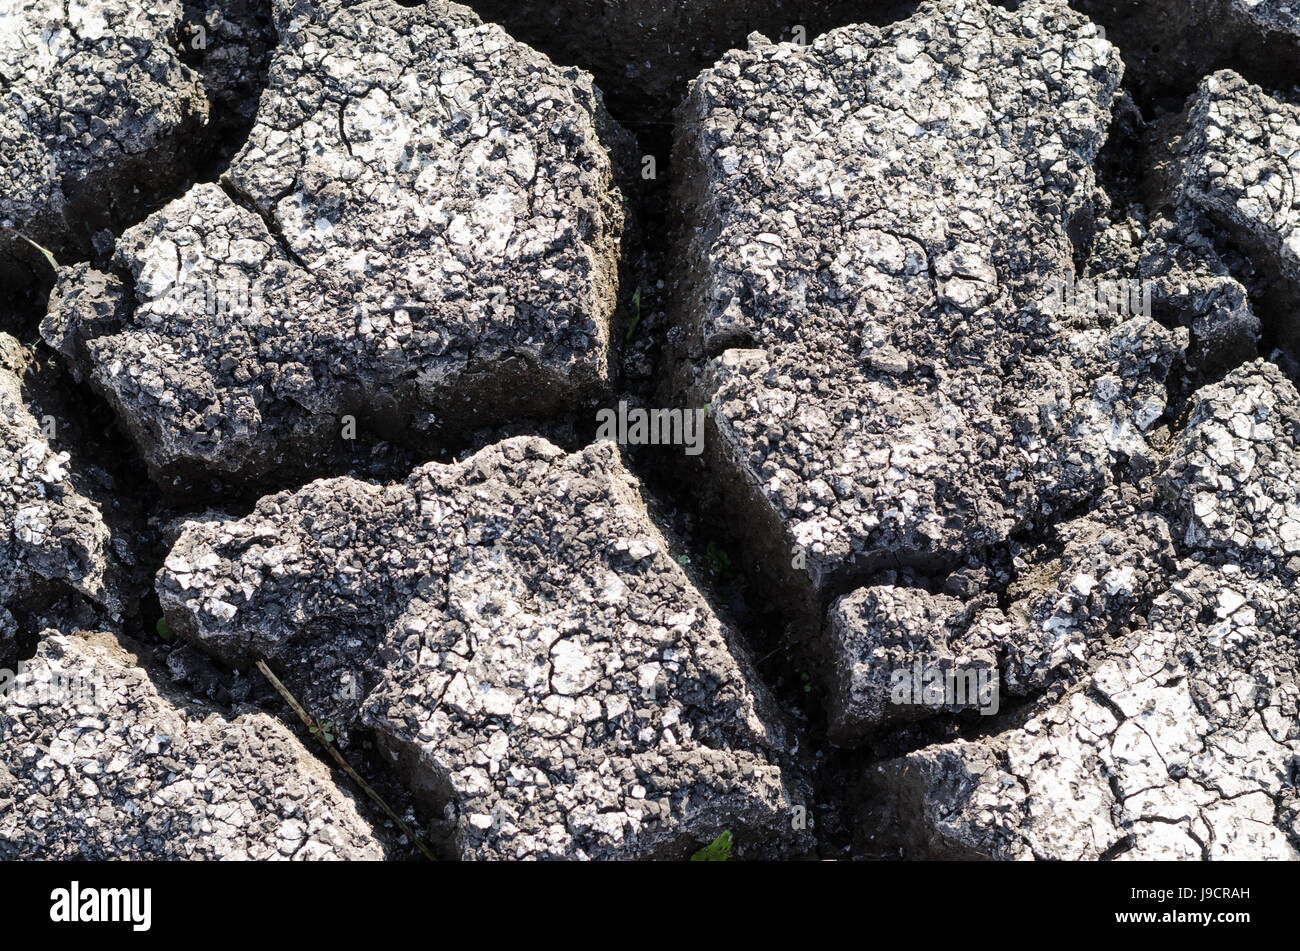 Textured background of dry cracked earth surface Stock Photo